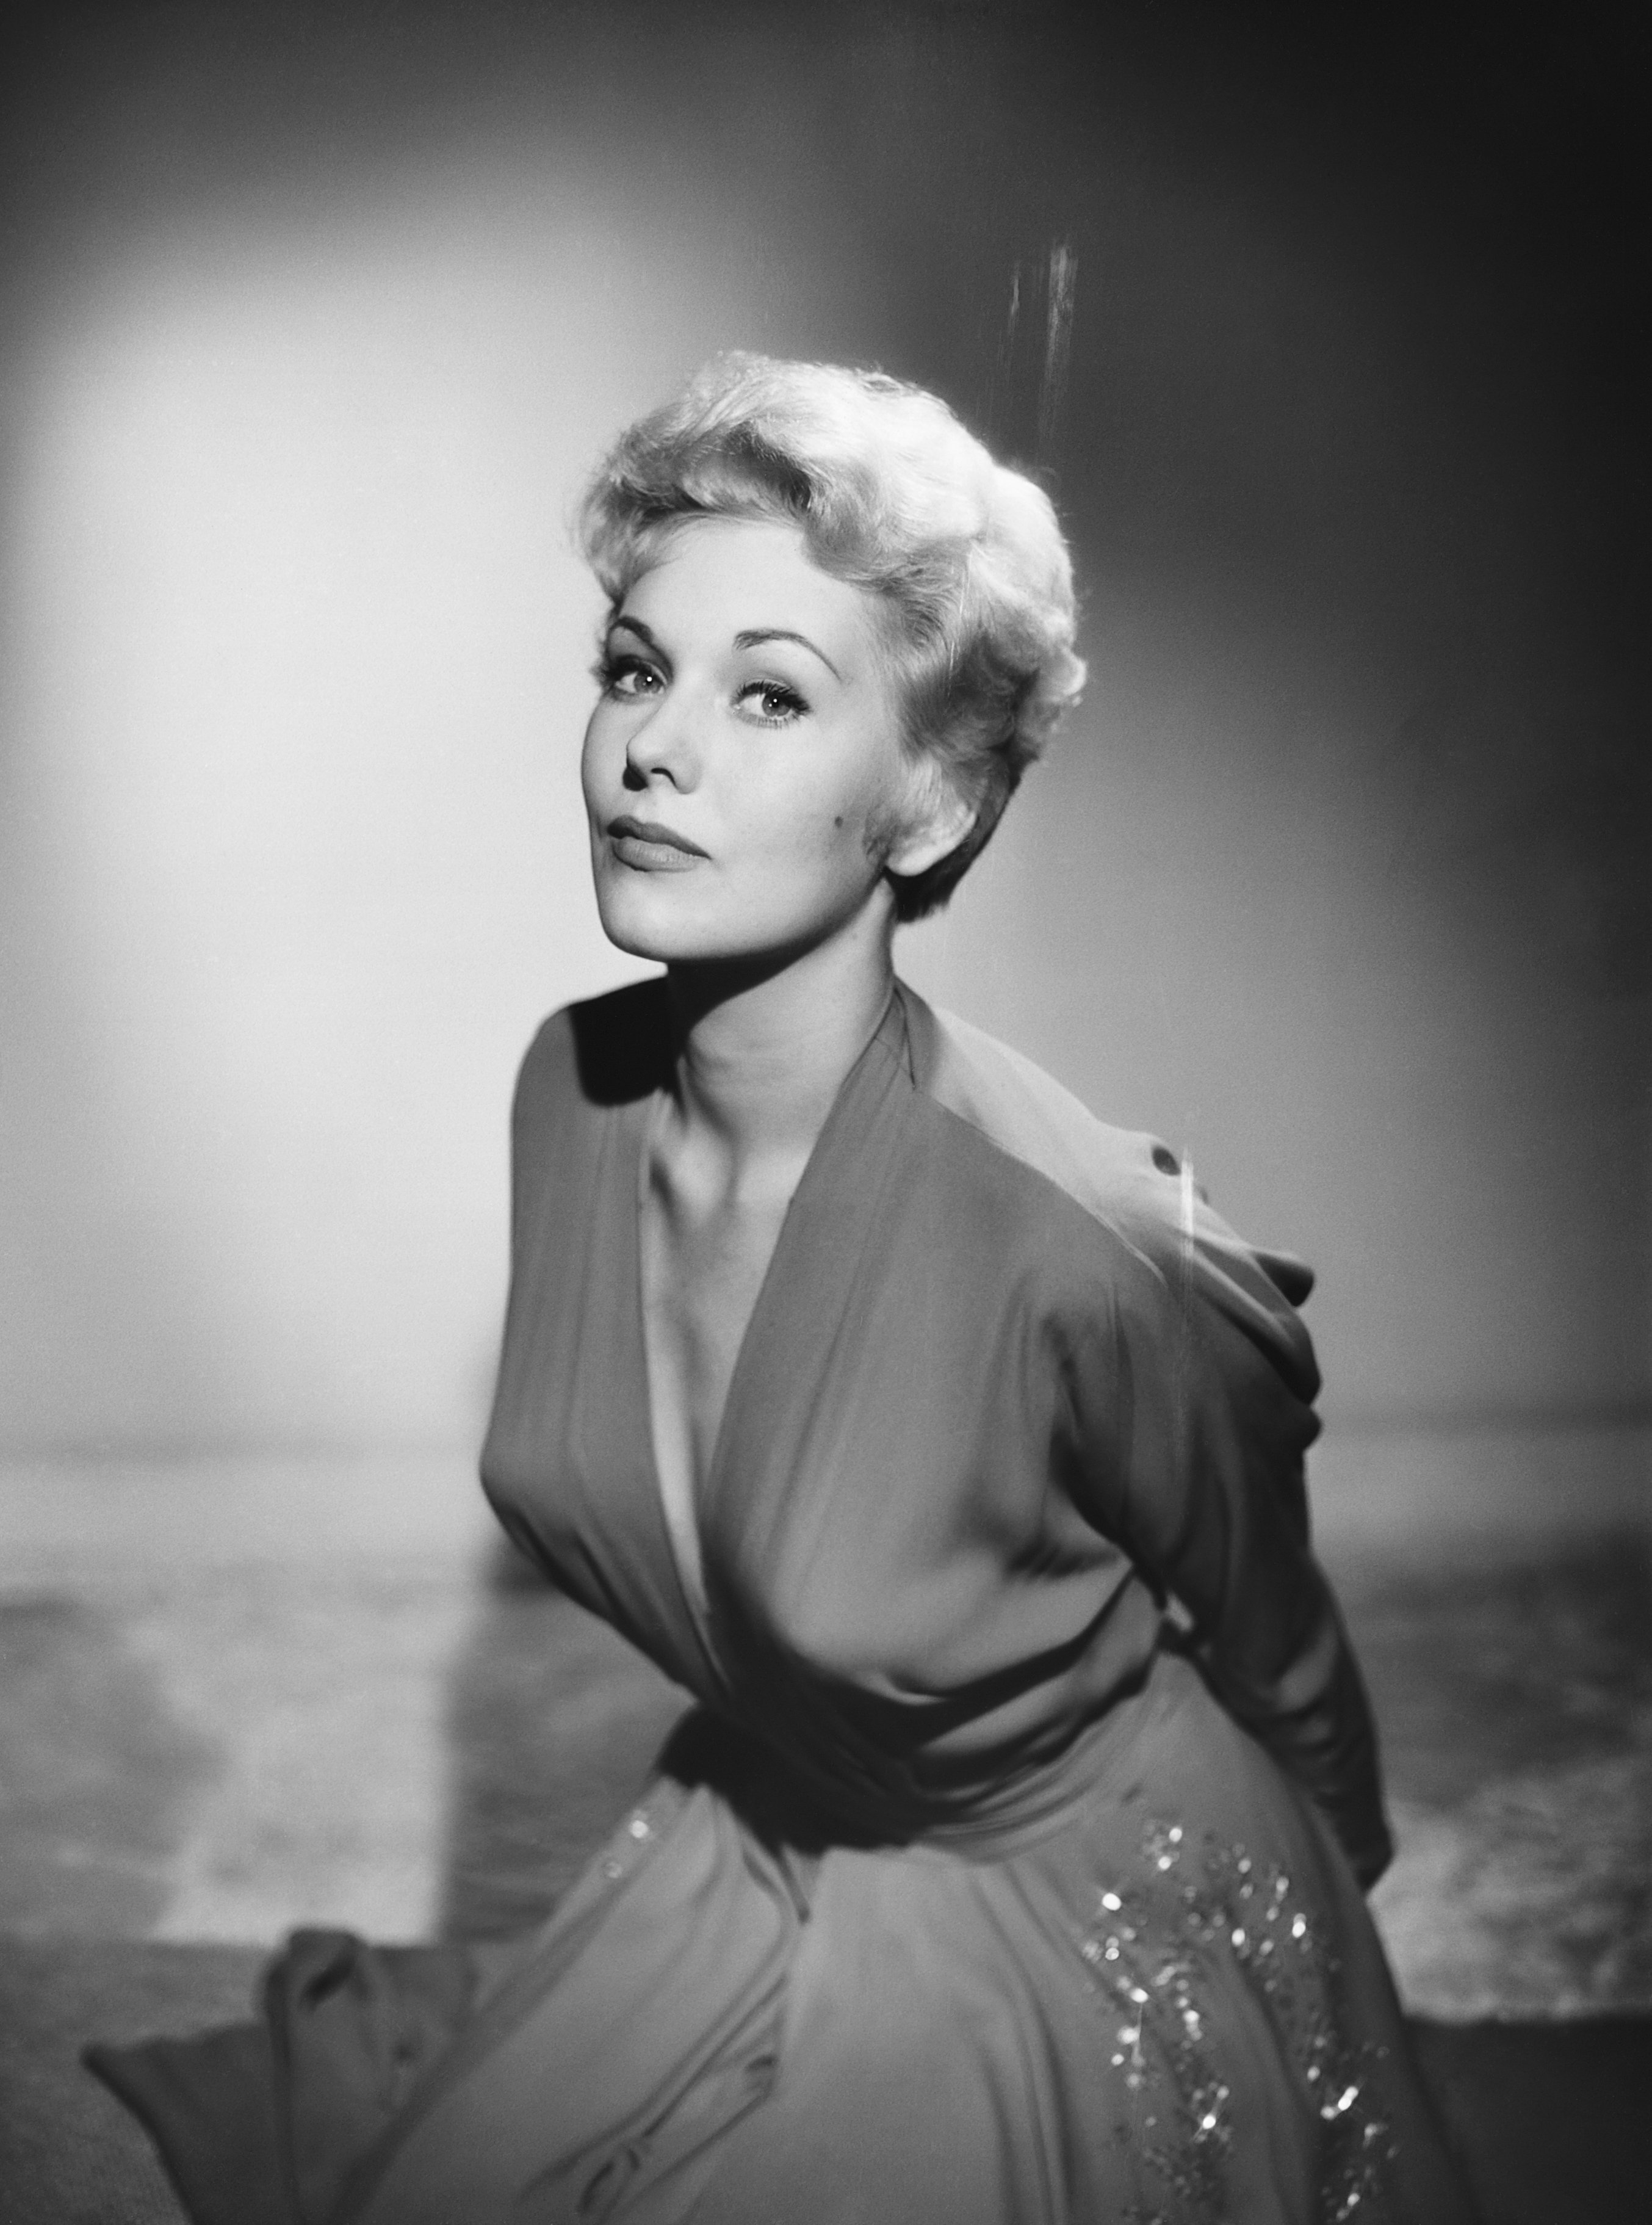 Kim Novak photographed by Baron, 1954.| Source: Getty Images